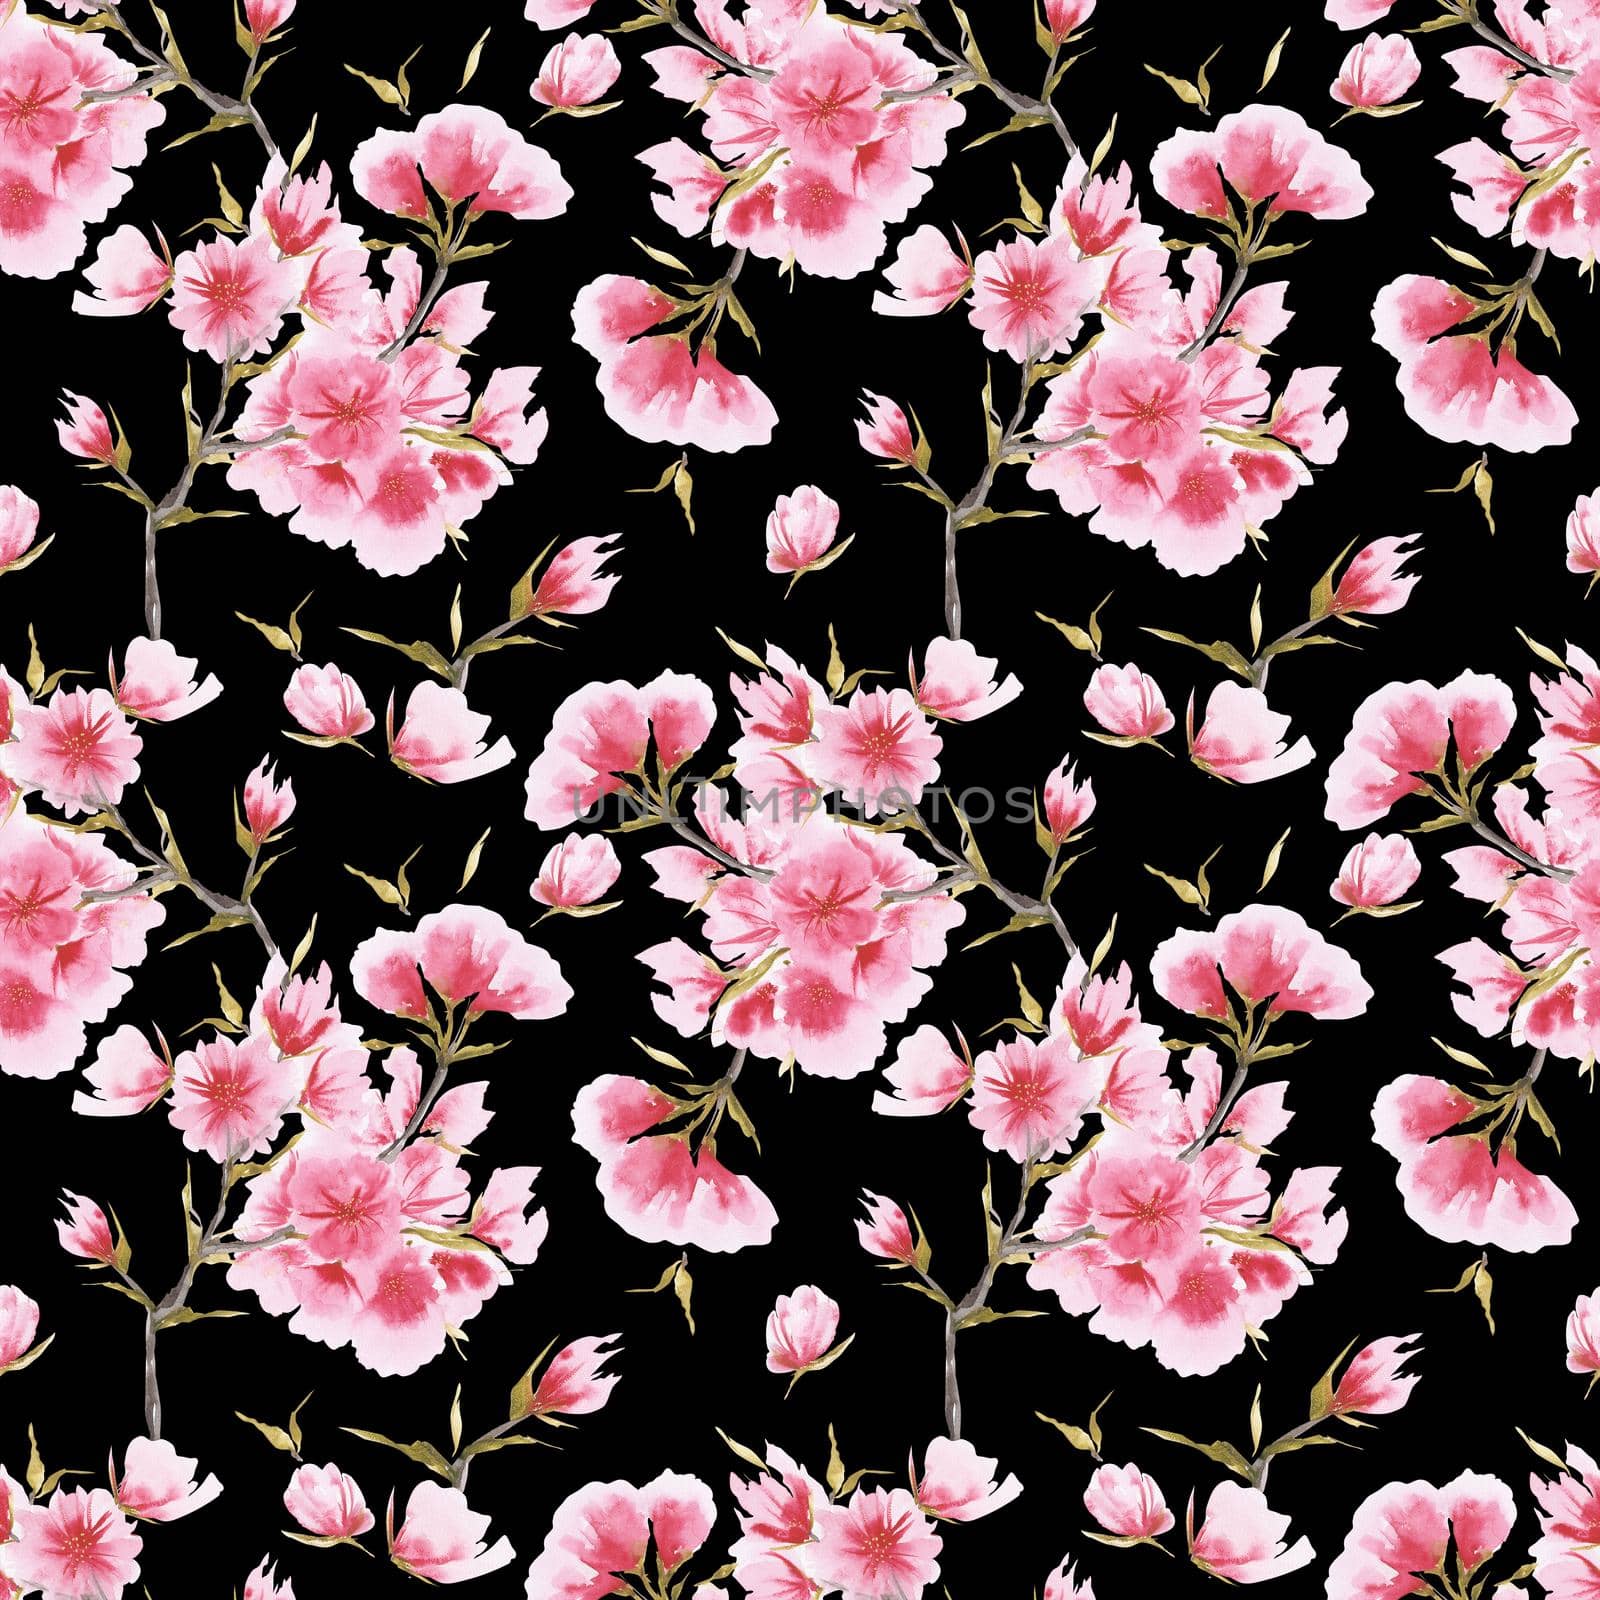 Watercolor cherry blossom in asian one-stroke painting style. Seamless pattern on a black background, path included